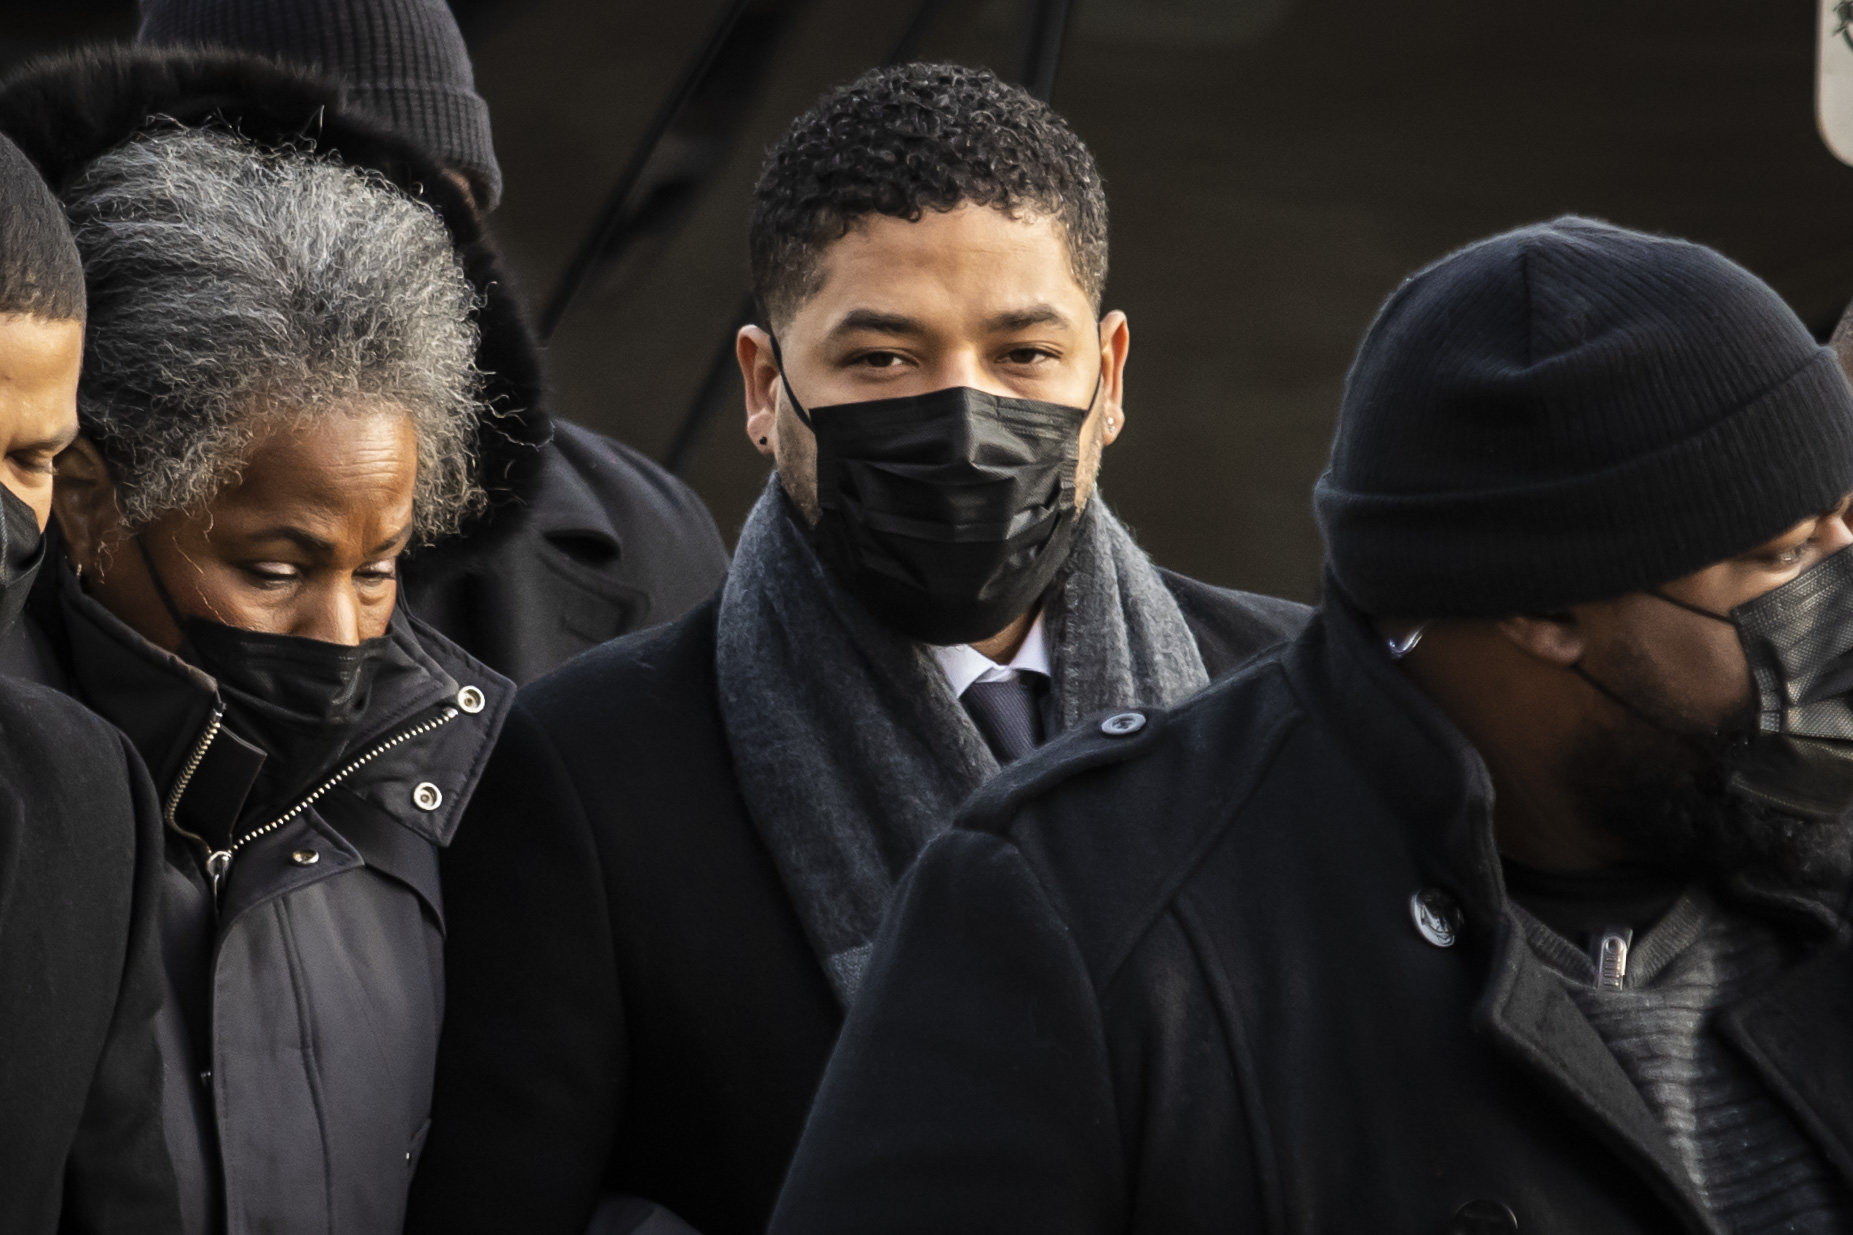 Flanked by family members, supporters, attorneys and bodyguards, former “Empire” star Jussie Smollett walks into the Leighton Criminal Courthouse, Tuesday morning, Dec. 7, 2021.